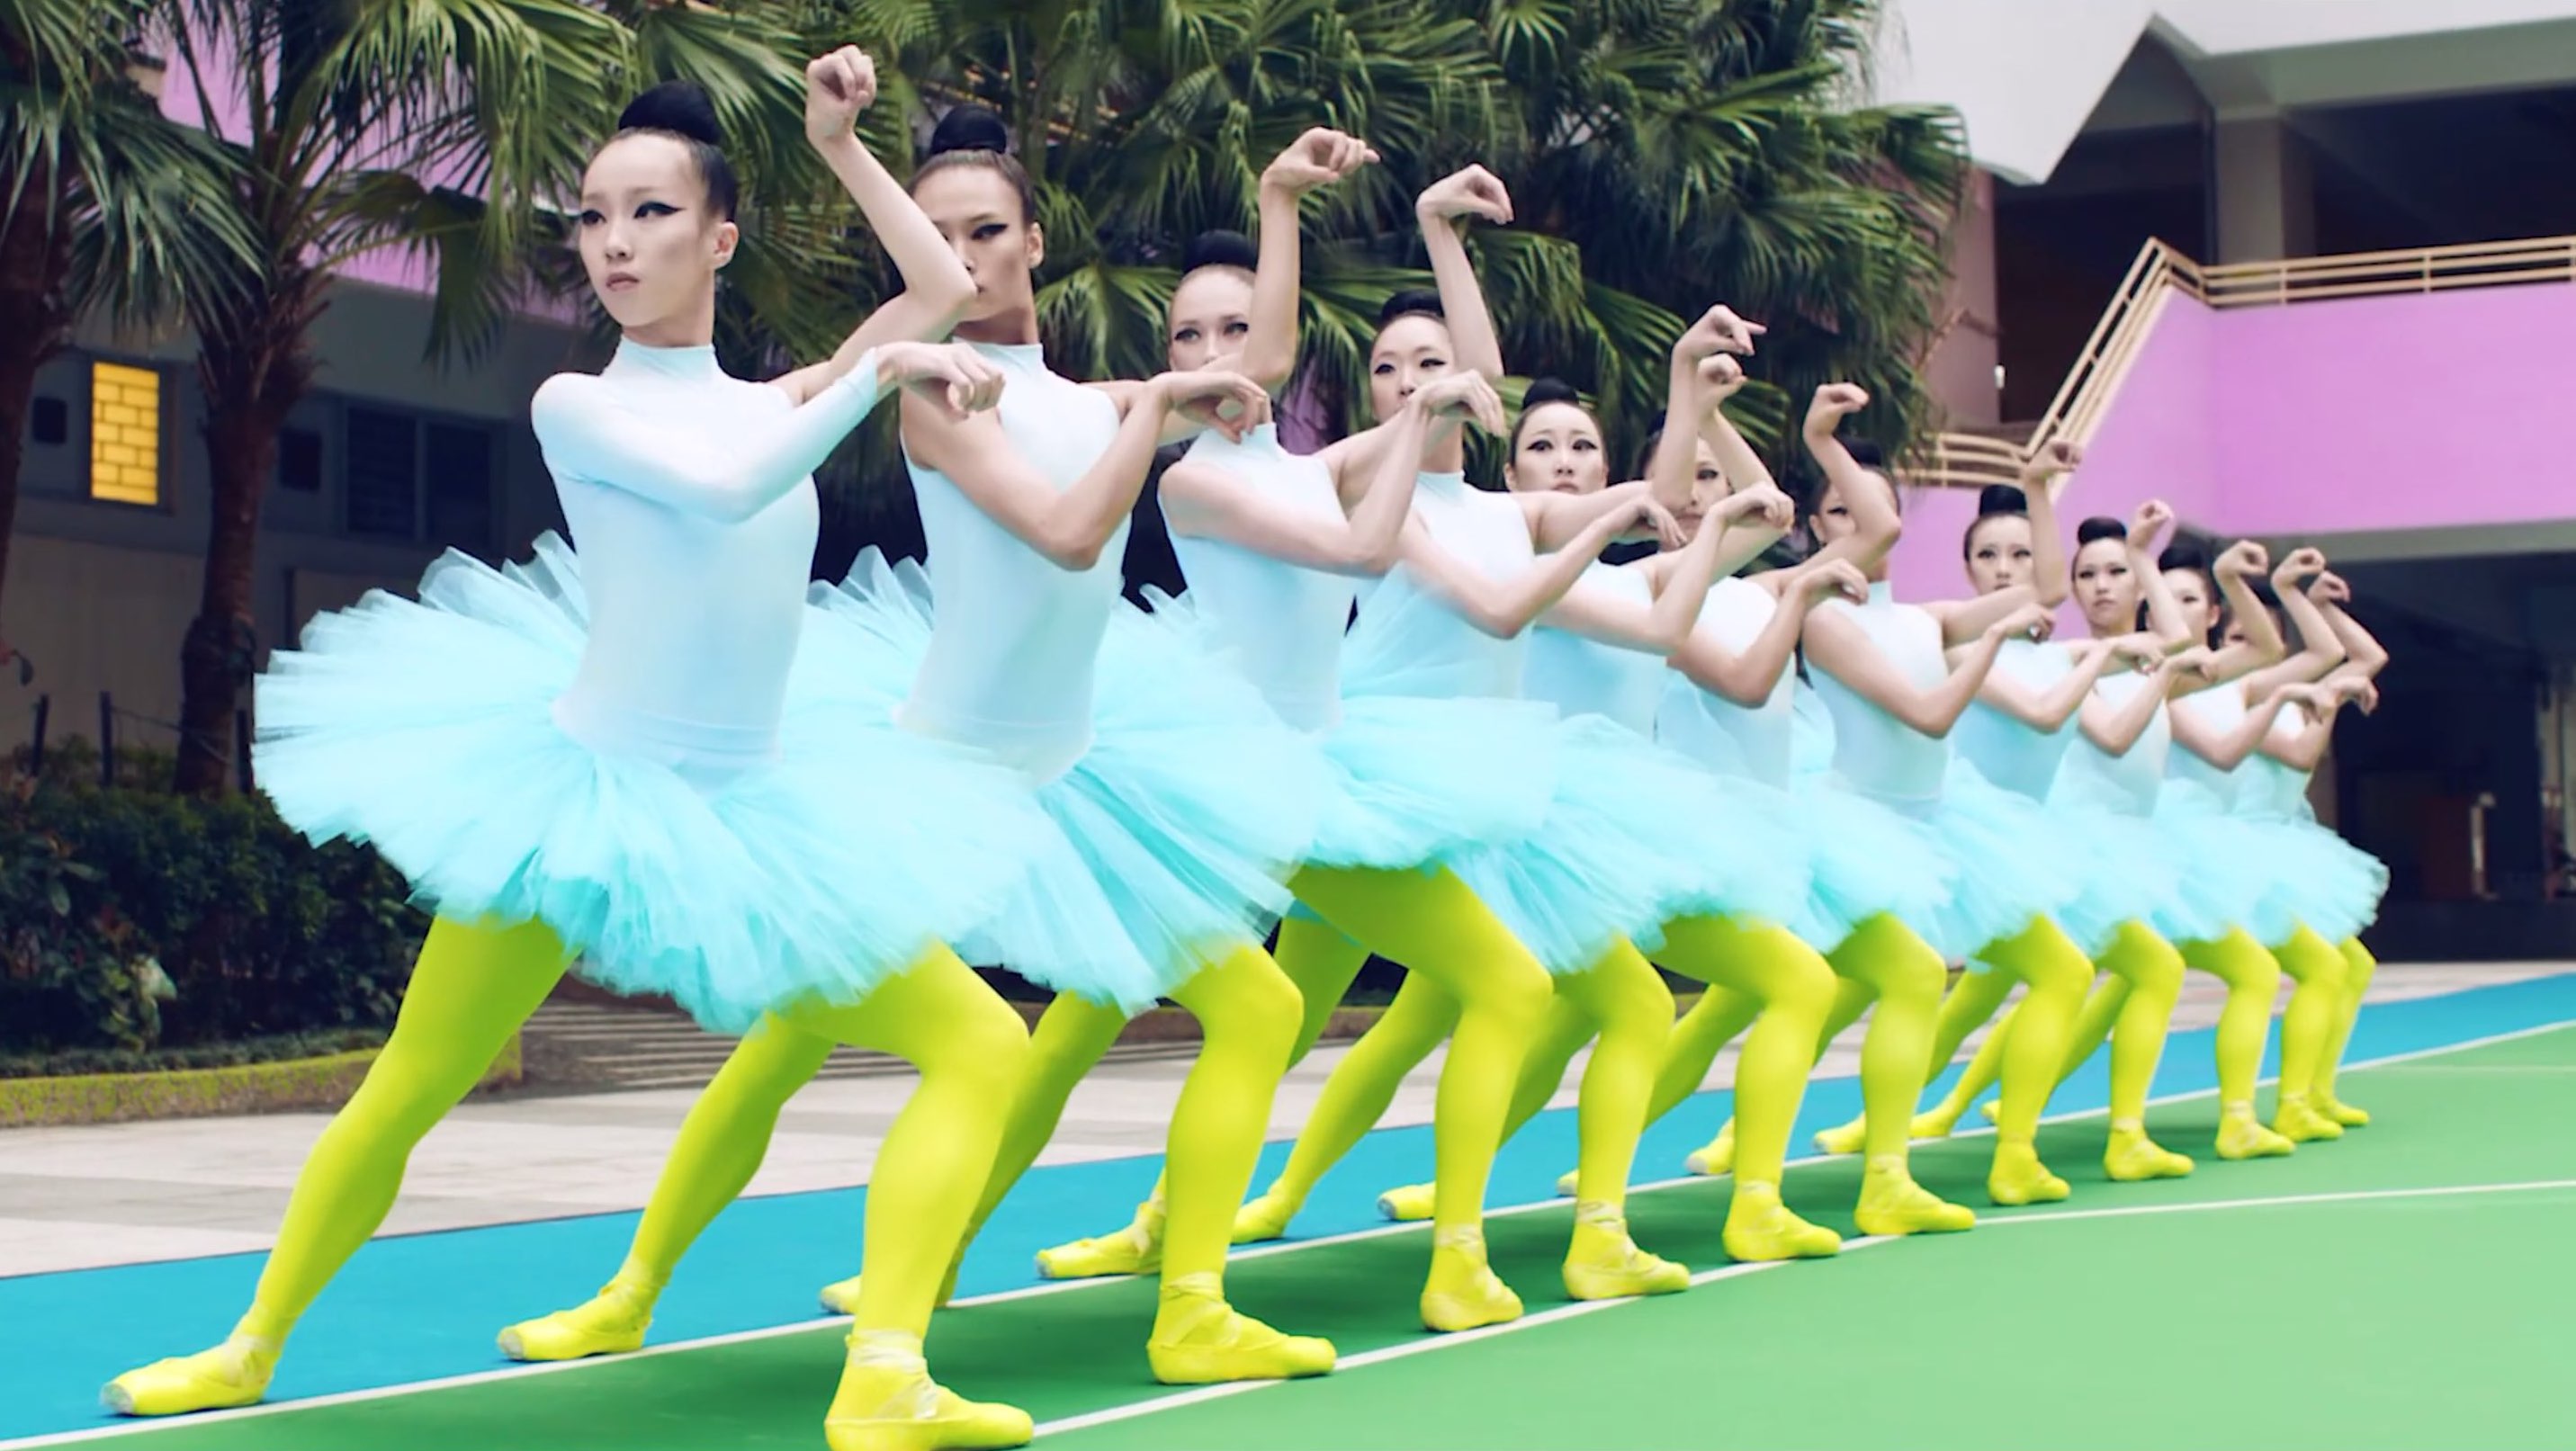 A still from a promotional video marking the Hong Kong Ballet’s 40th anniversary. Screengrab via Vimeo.